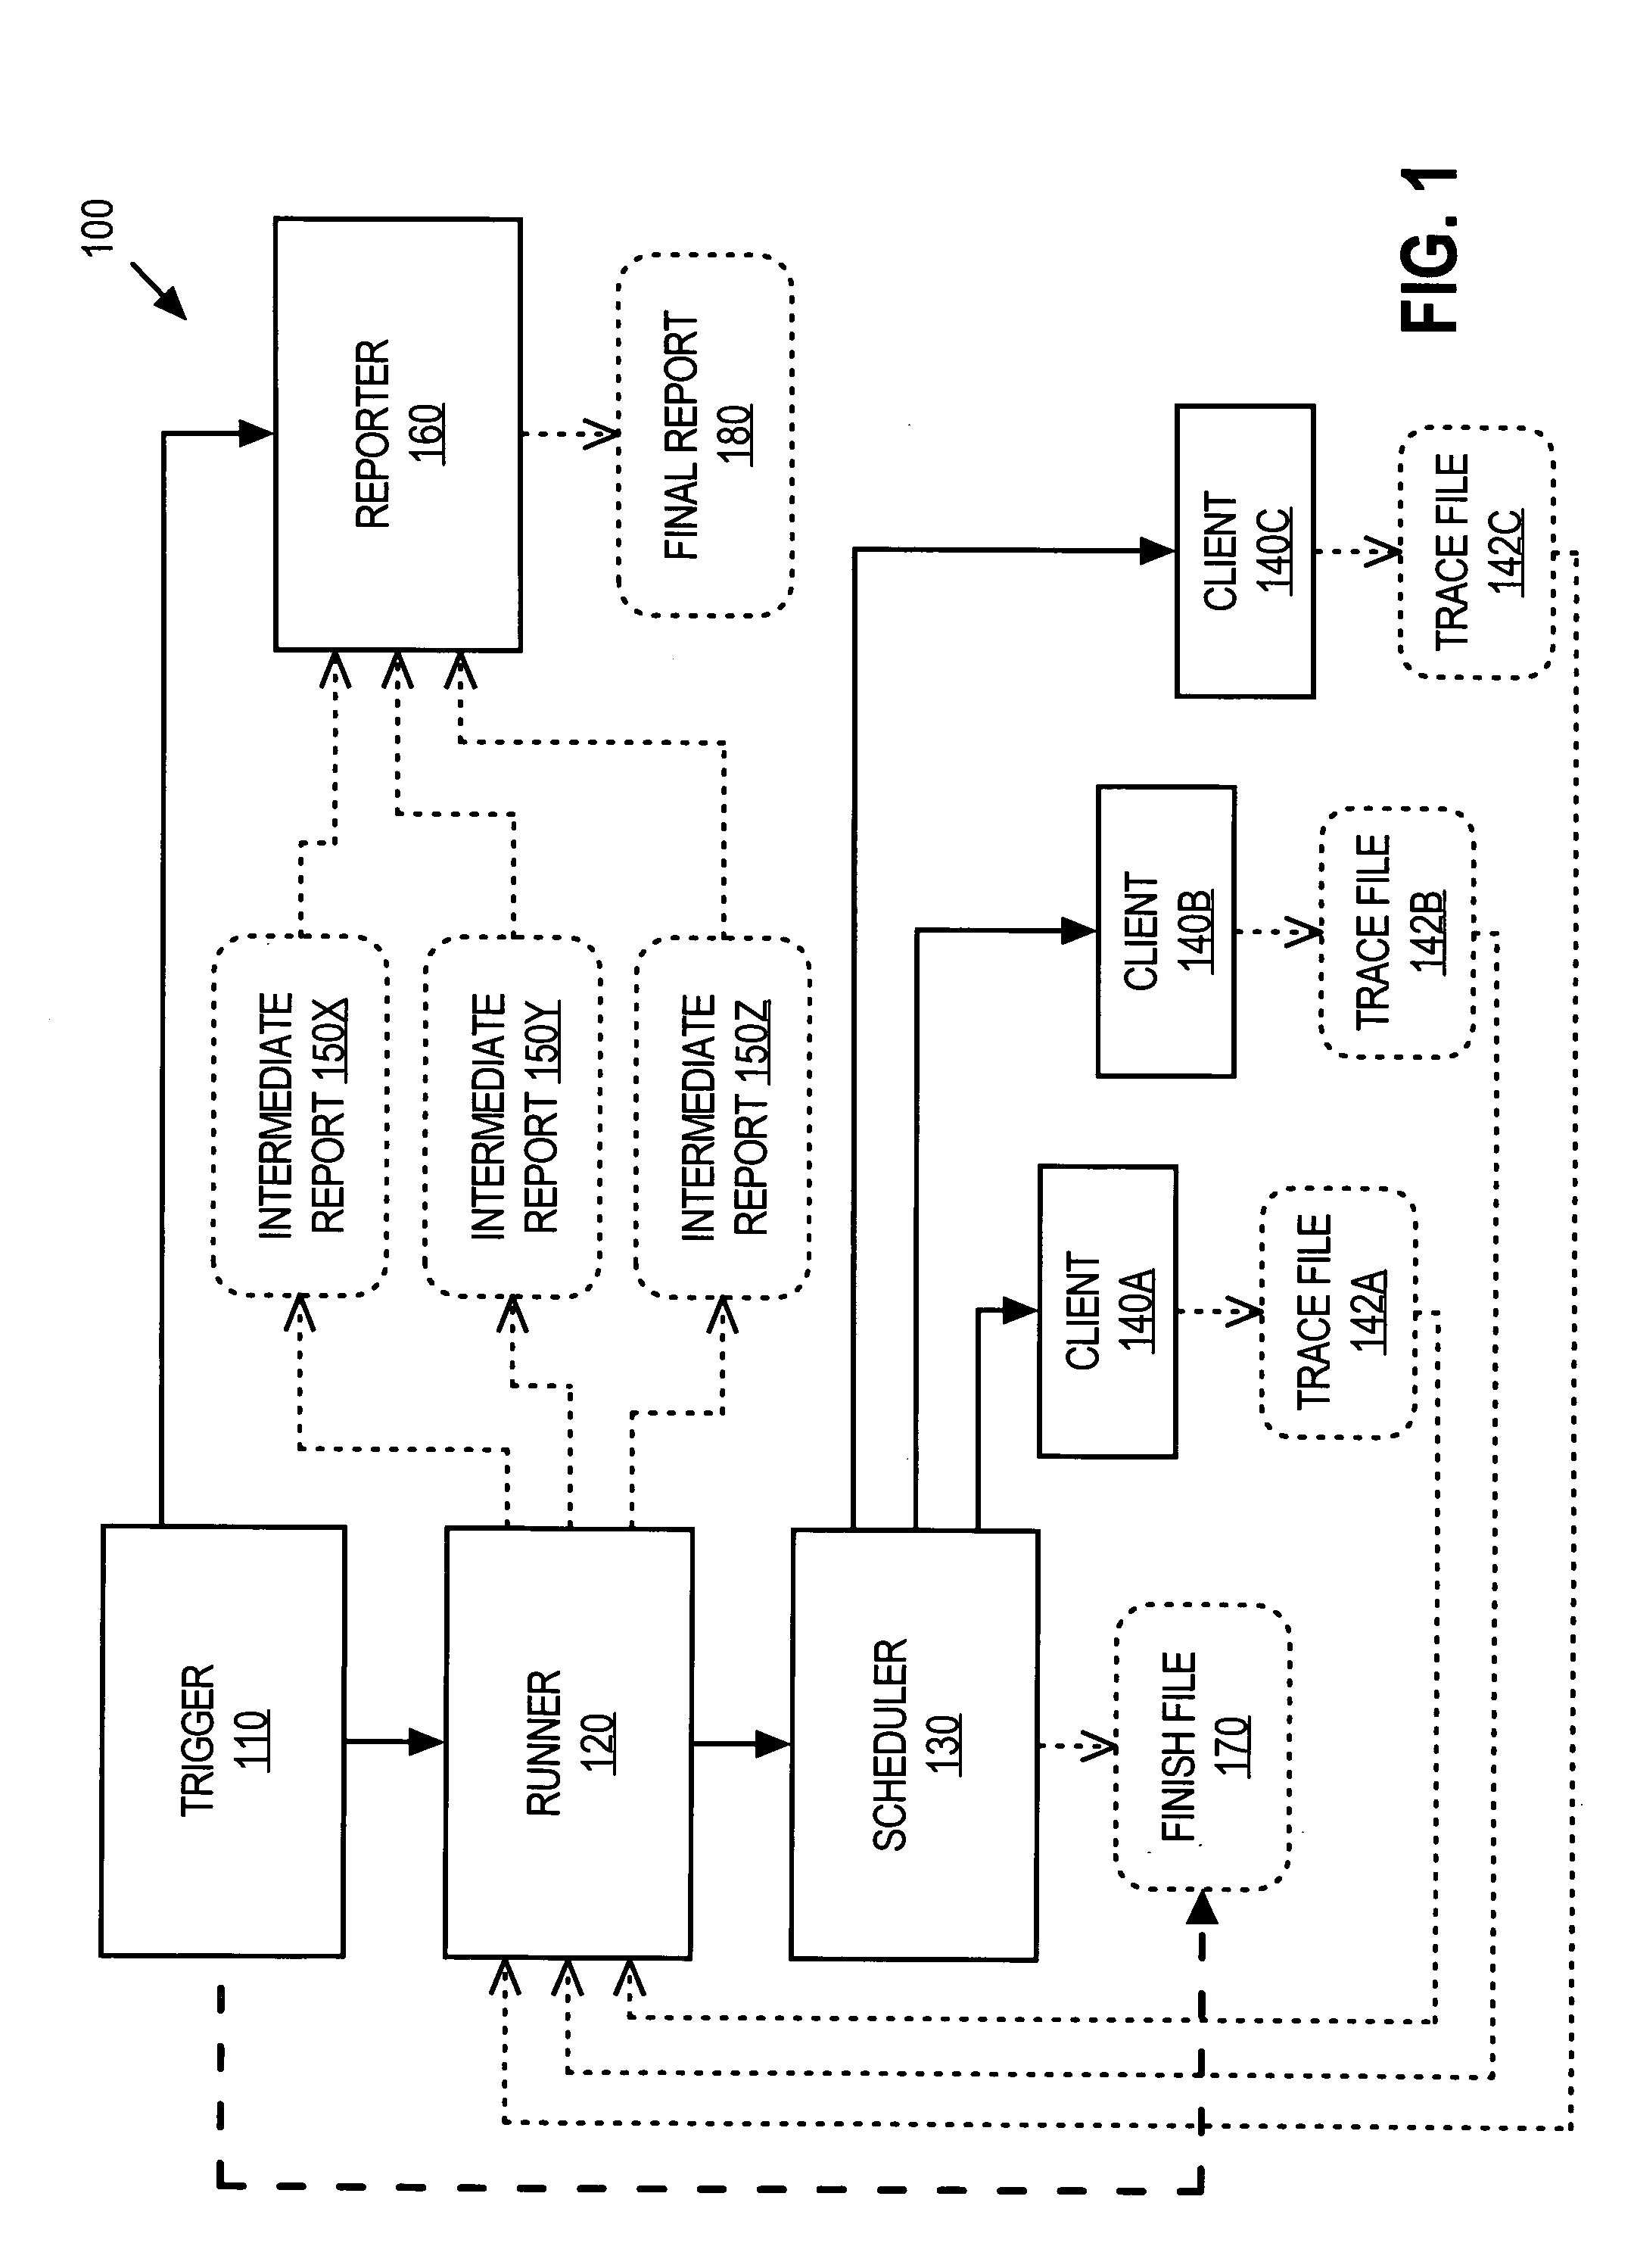 Mechanism for testing execution of applets with plug-ins and applications